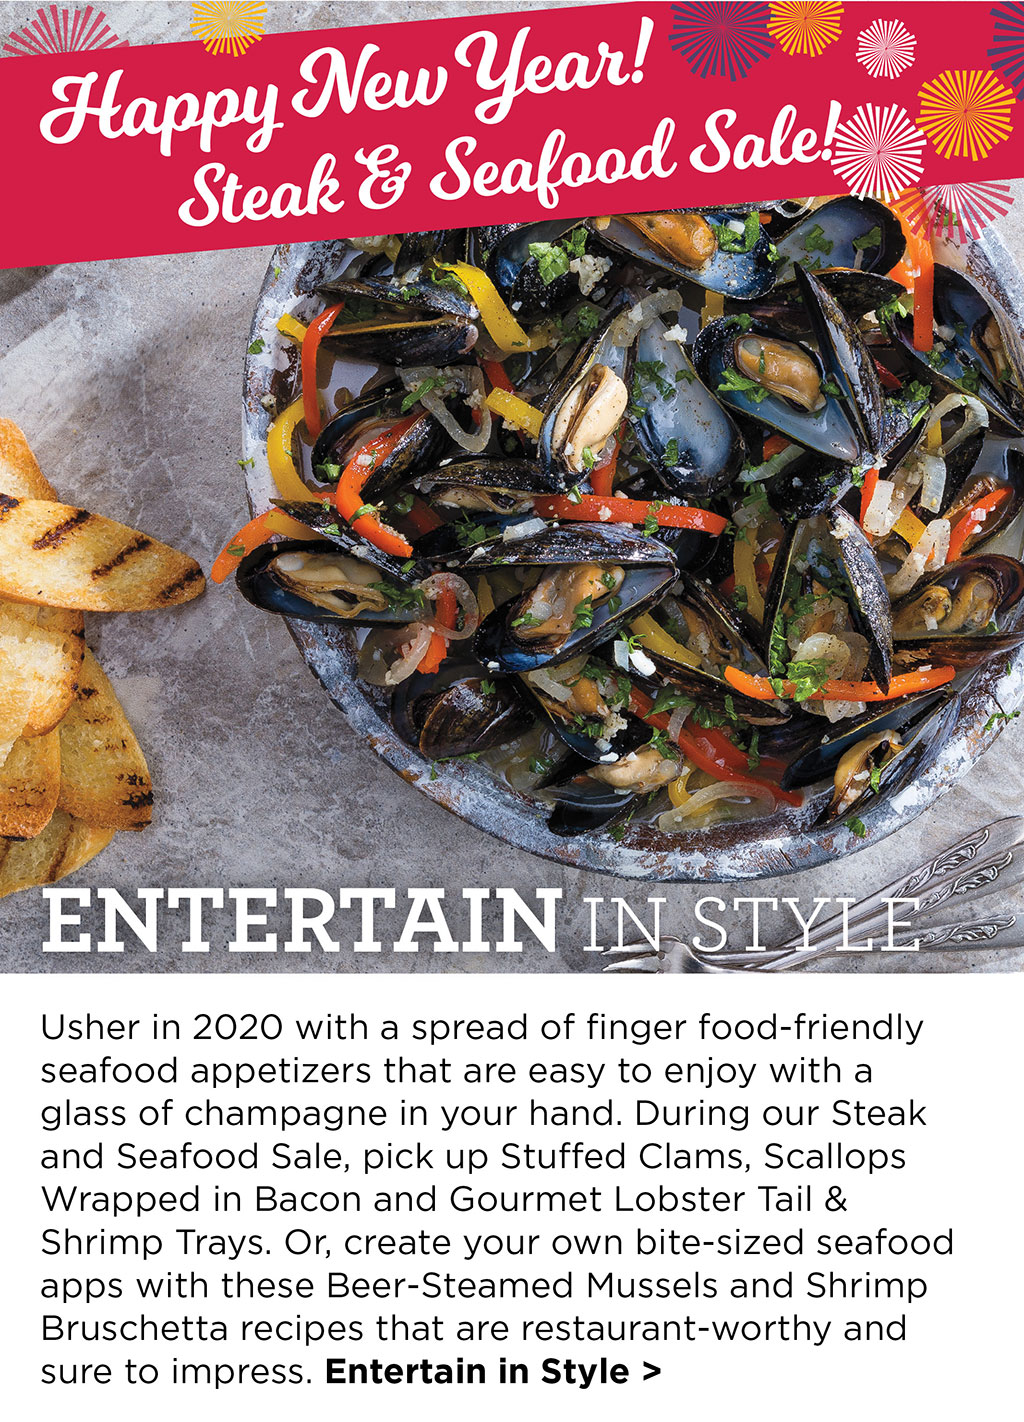 Happy New Year Steak & Seafood Sale! Entertain in Style - Usher in 2020 with a spread of finger food-friendly seafood appetizers that are easy to enjoy with a glass of champagne in your hand. During our Steak and Seafood Sale, pick up Stuffed Clams, Scallops Wrapped in Bacon and Gourmet Lobster Tail & Shrimp Trays. Or, create your own bite-sized seafood apps with these Beer-Steamed Mussels and Shrimp Bruschetta recipes that are restaurant-worthy and sure to impress. Entertain in Style >